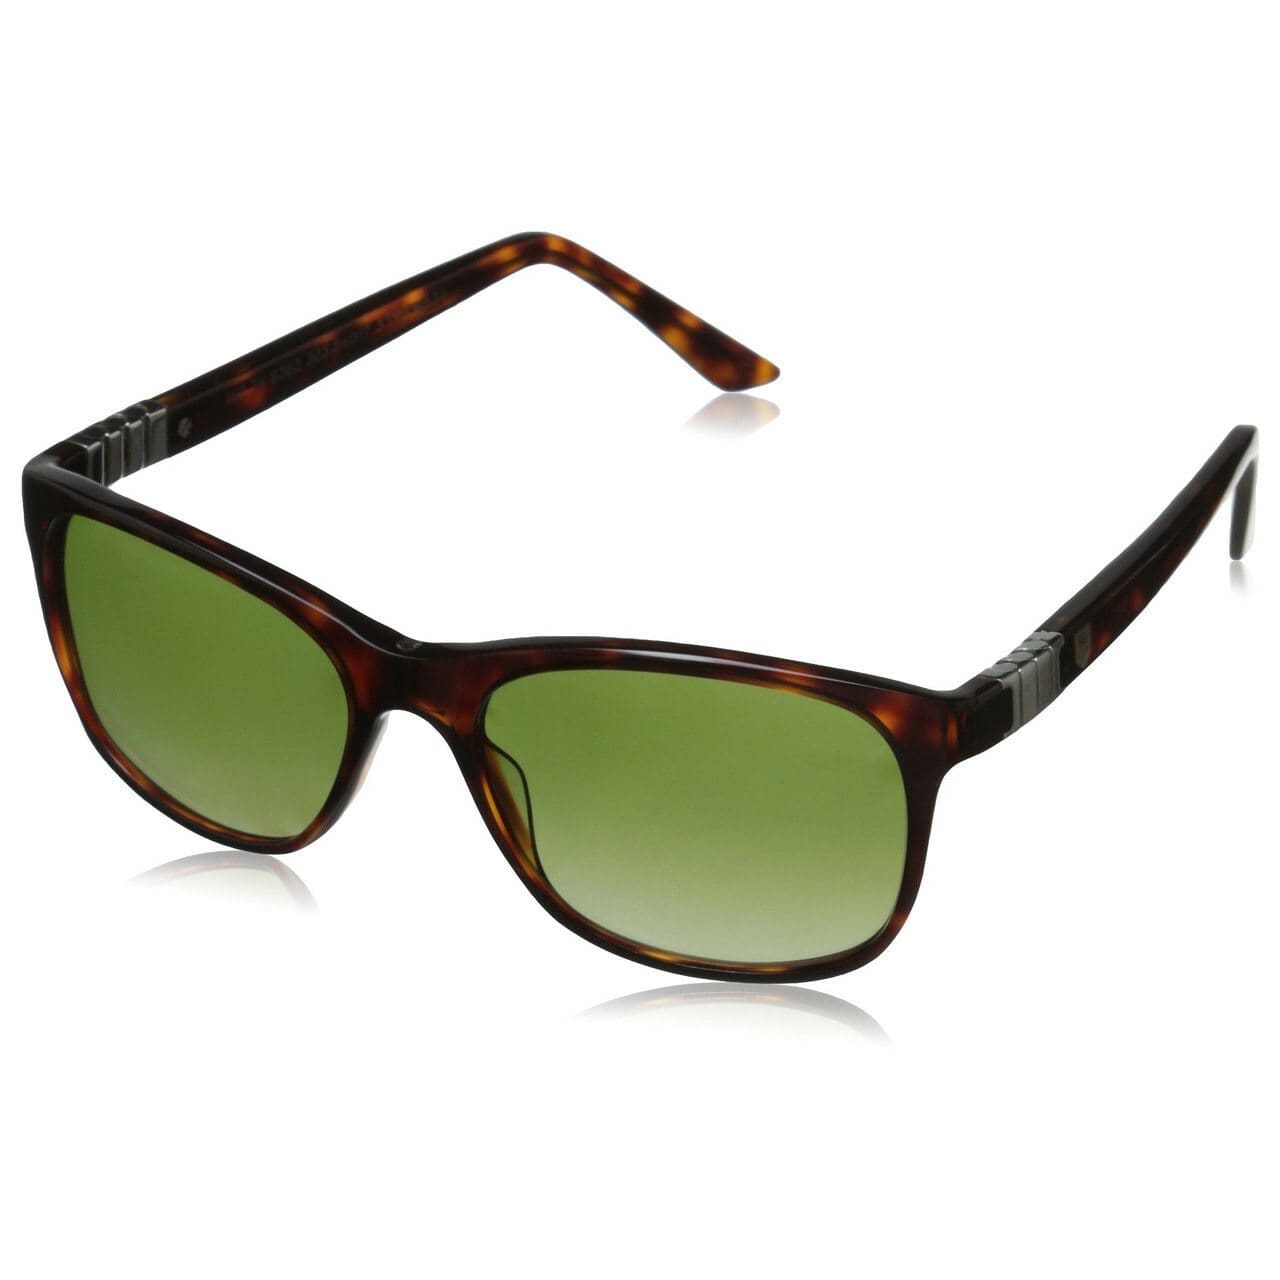 TAG Heuer 9382 Legend Unisex Acetate Sunglasses - Choose your color - Made in France 751105391653 669382303541603